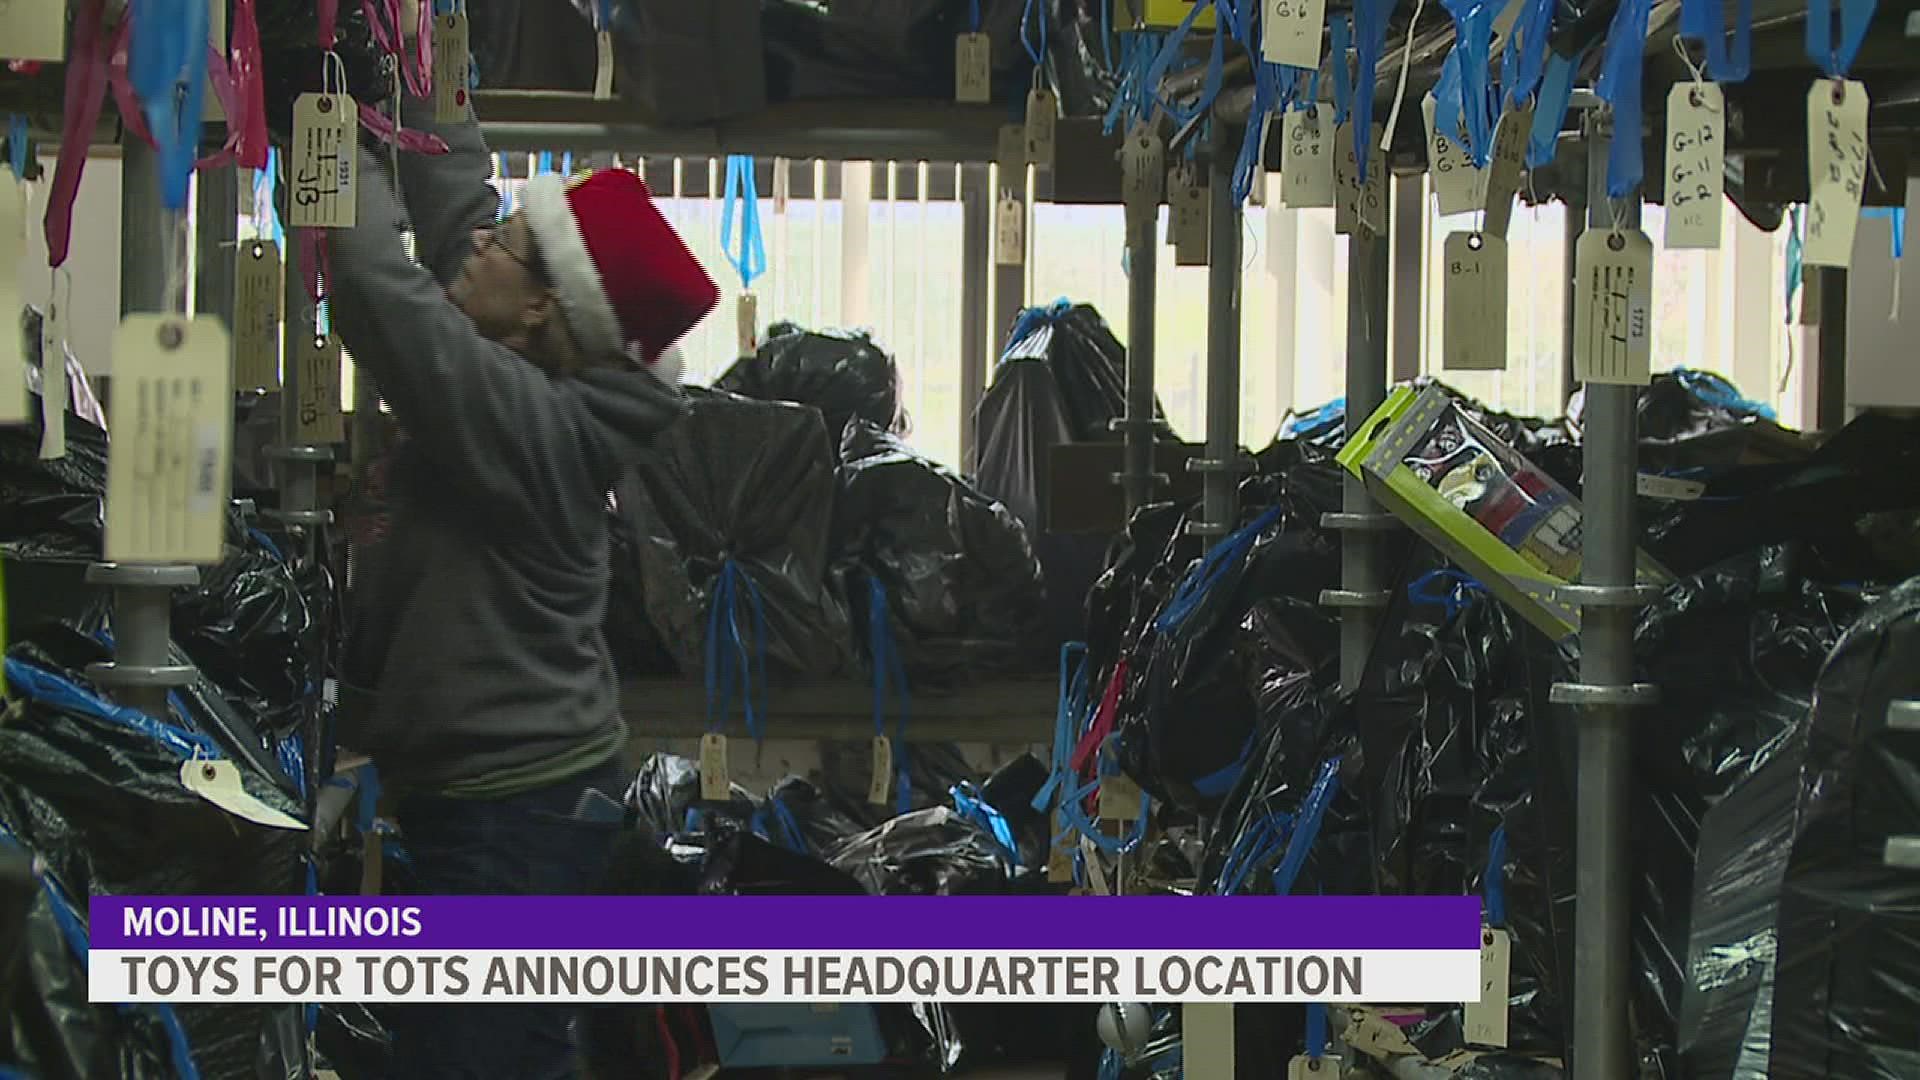 Toys for Tots will be headquartered in the old Kone building located at 1 Montgomery Drive, Moline.